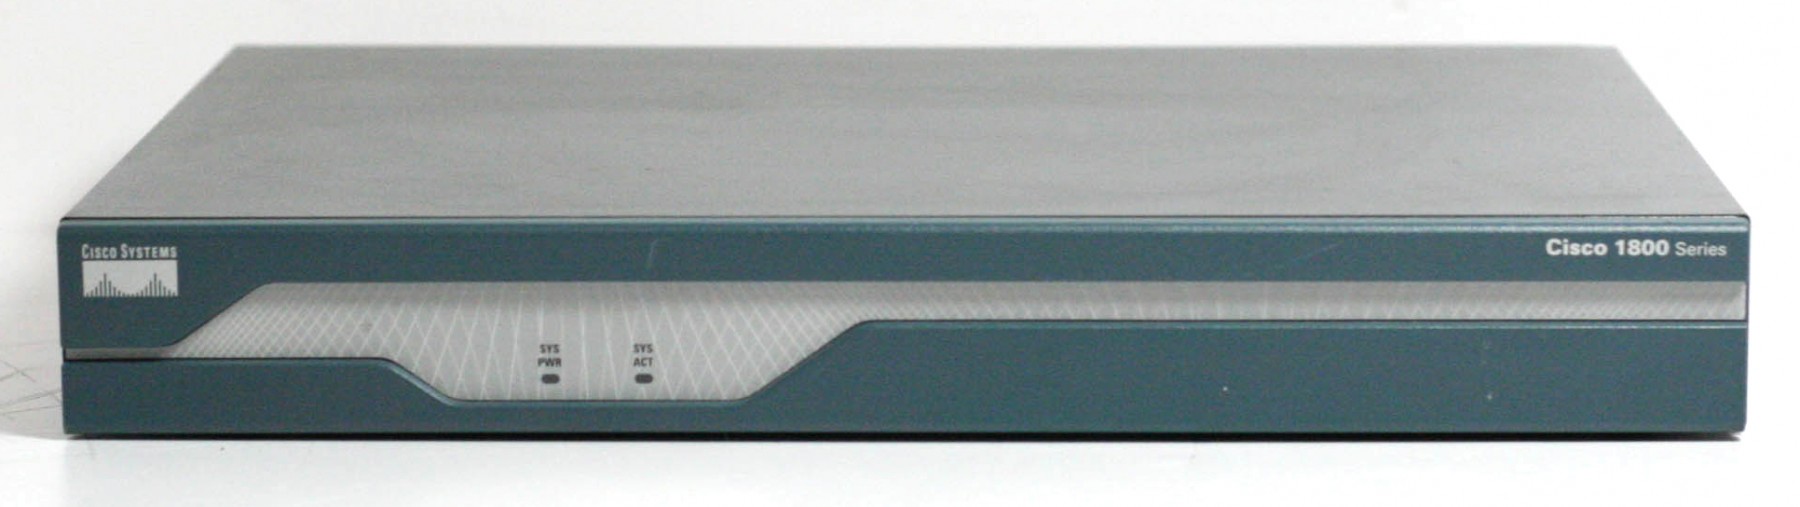 10000509-Cisco 1841 2-Port Wired Router -image